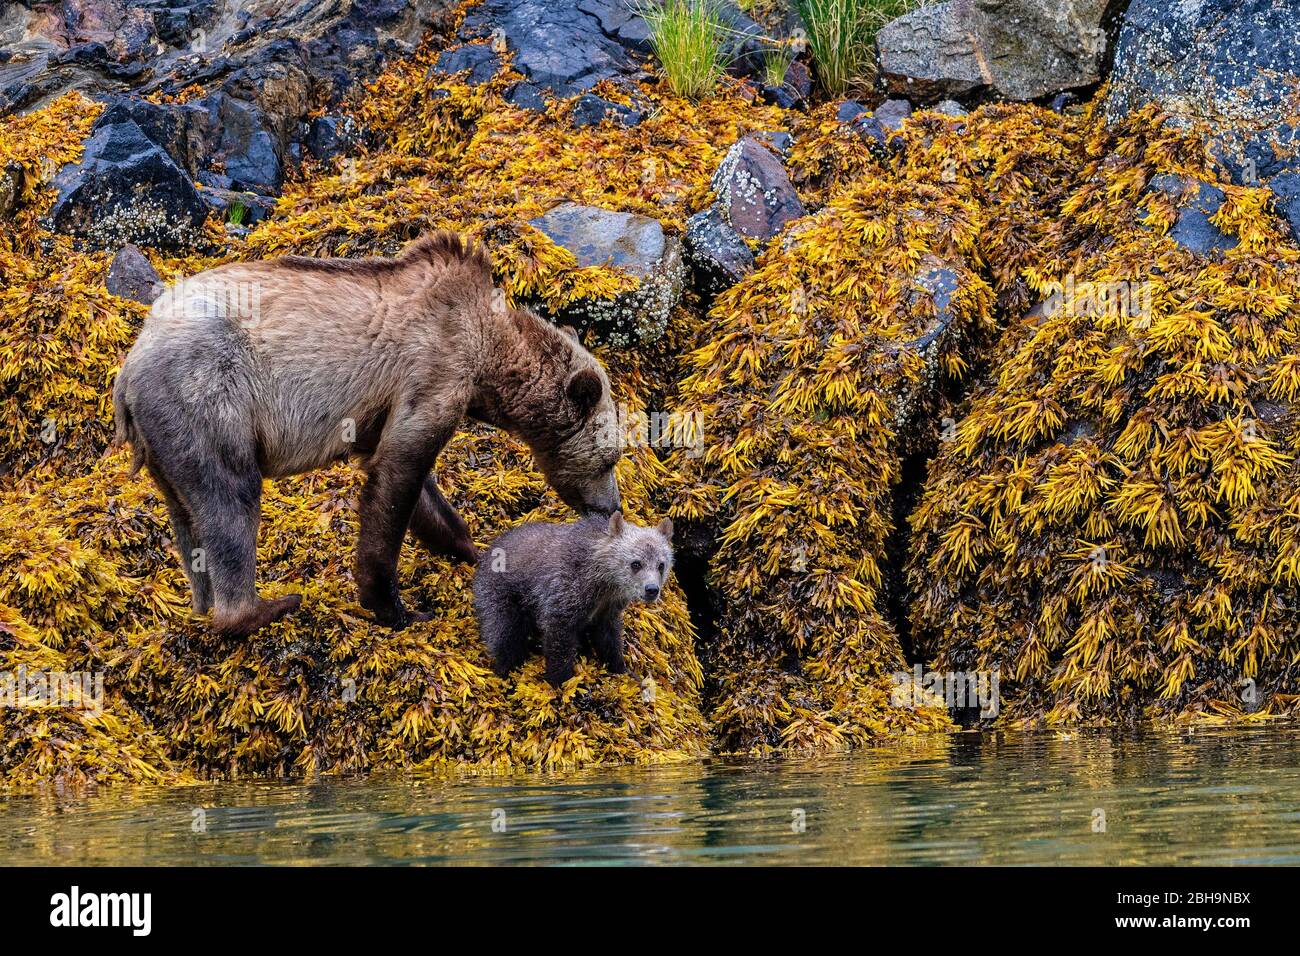 Grizzly bear cub with mother during low tide on the coast of Great Bear Rainforest, First Nations Territory, British Columbia, Canada Stock Photo